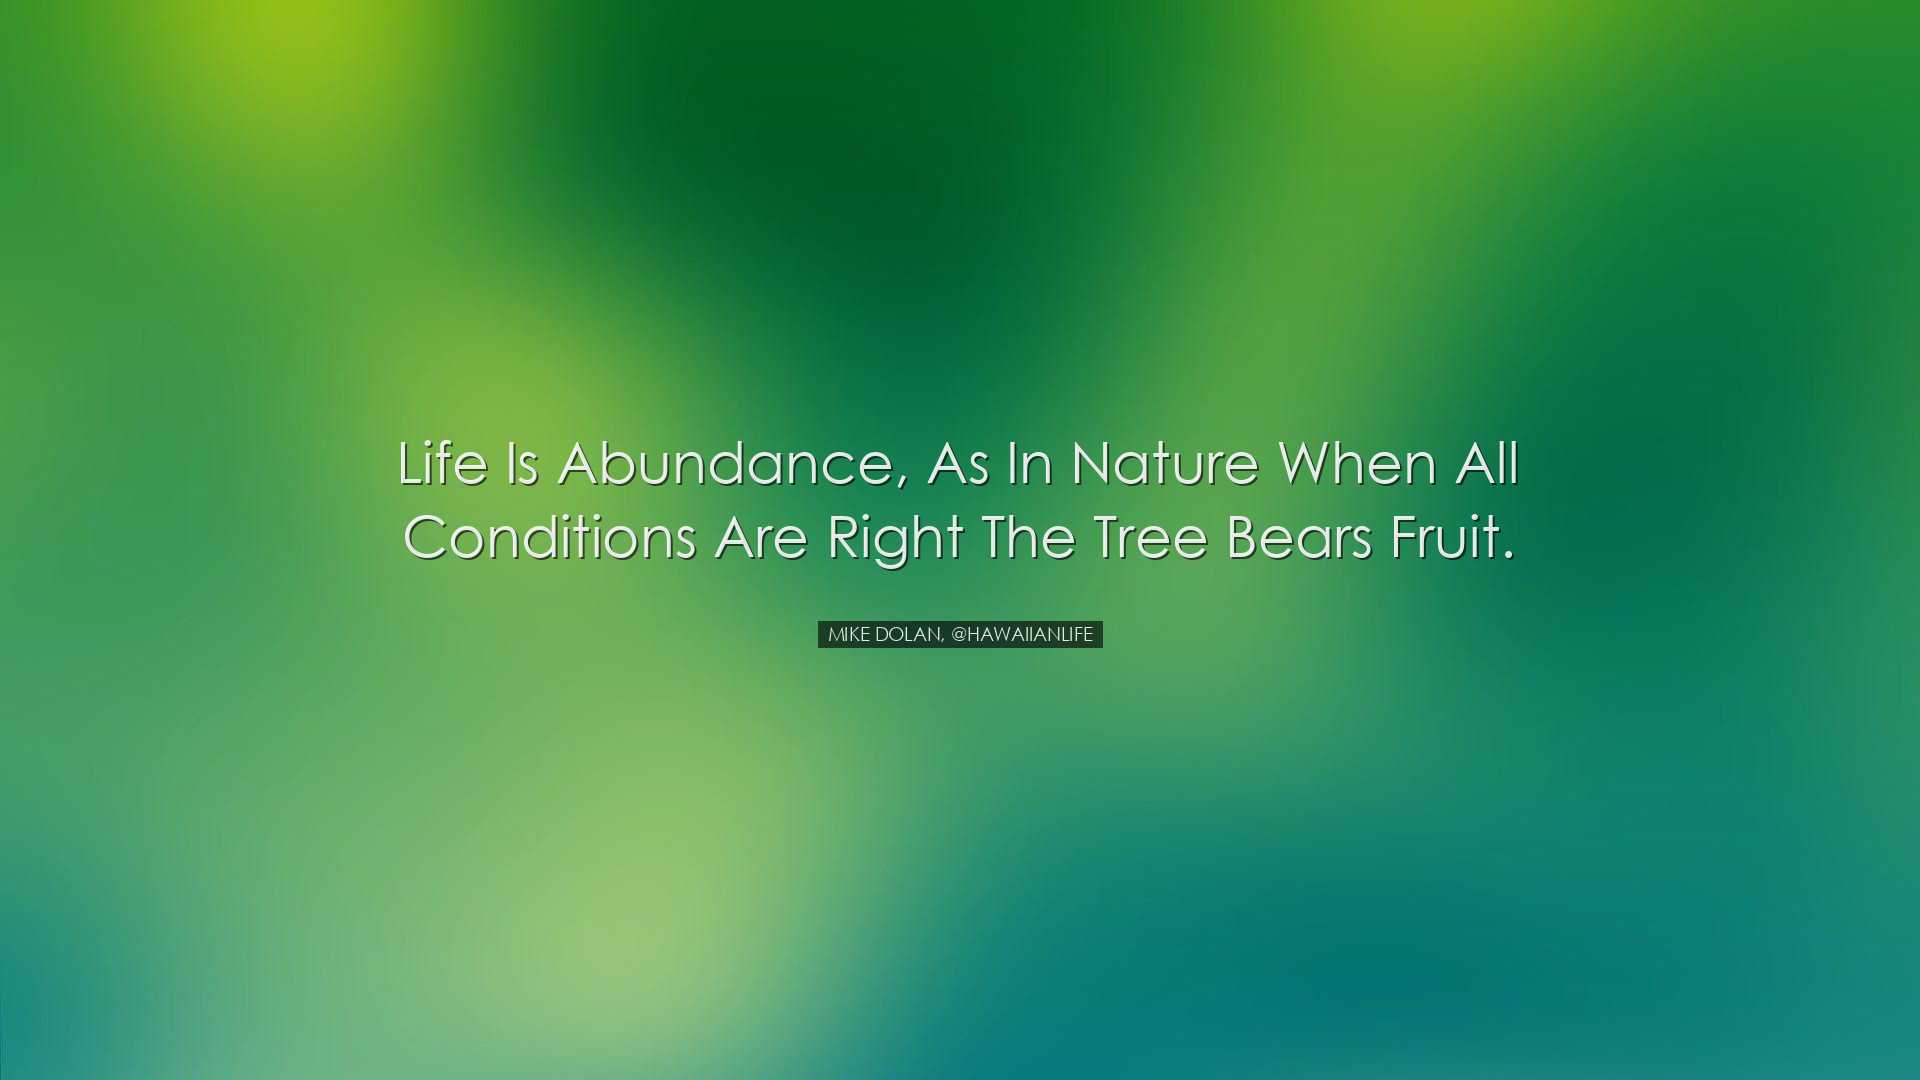 Life is abundance, as in nature when all conditions are right the